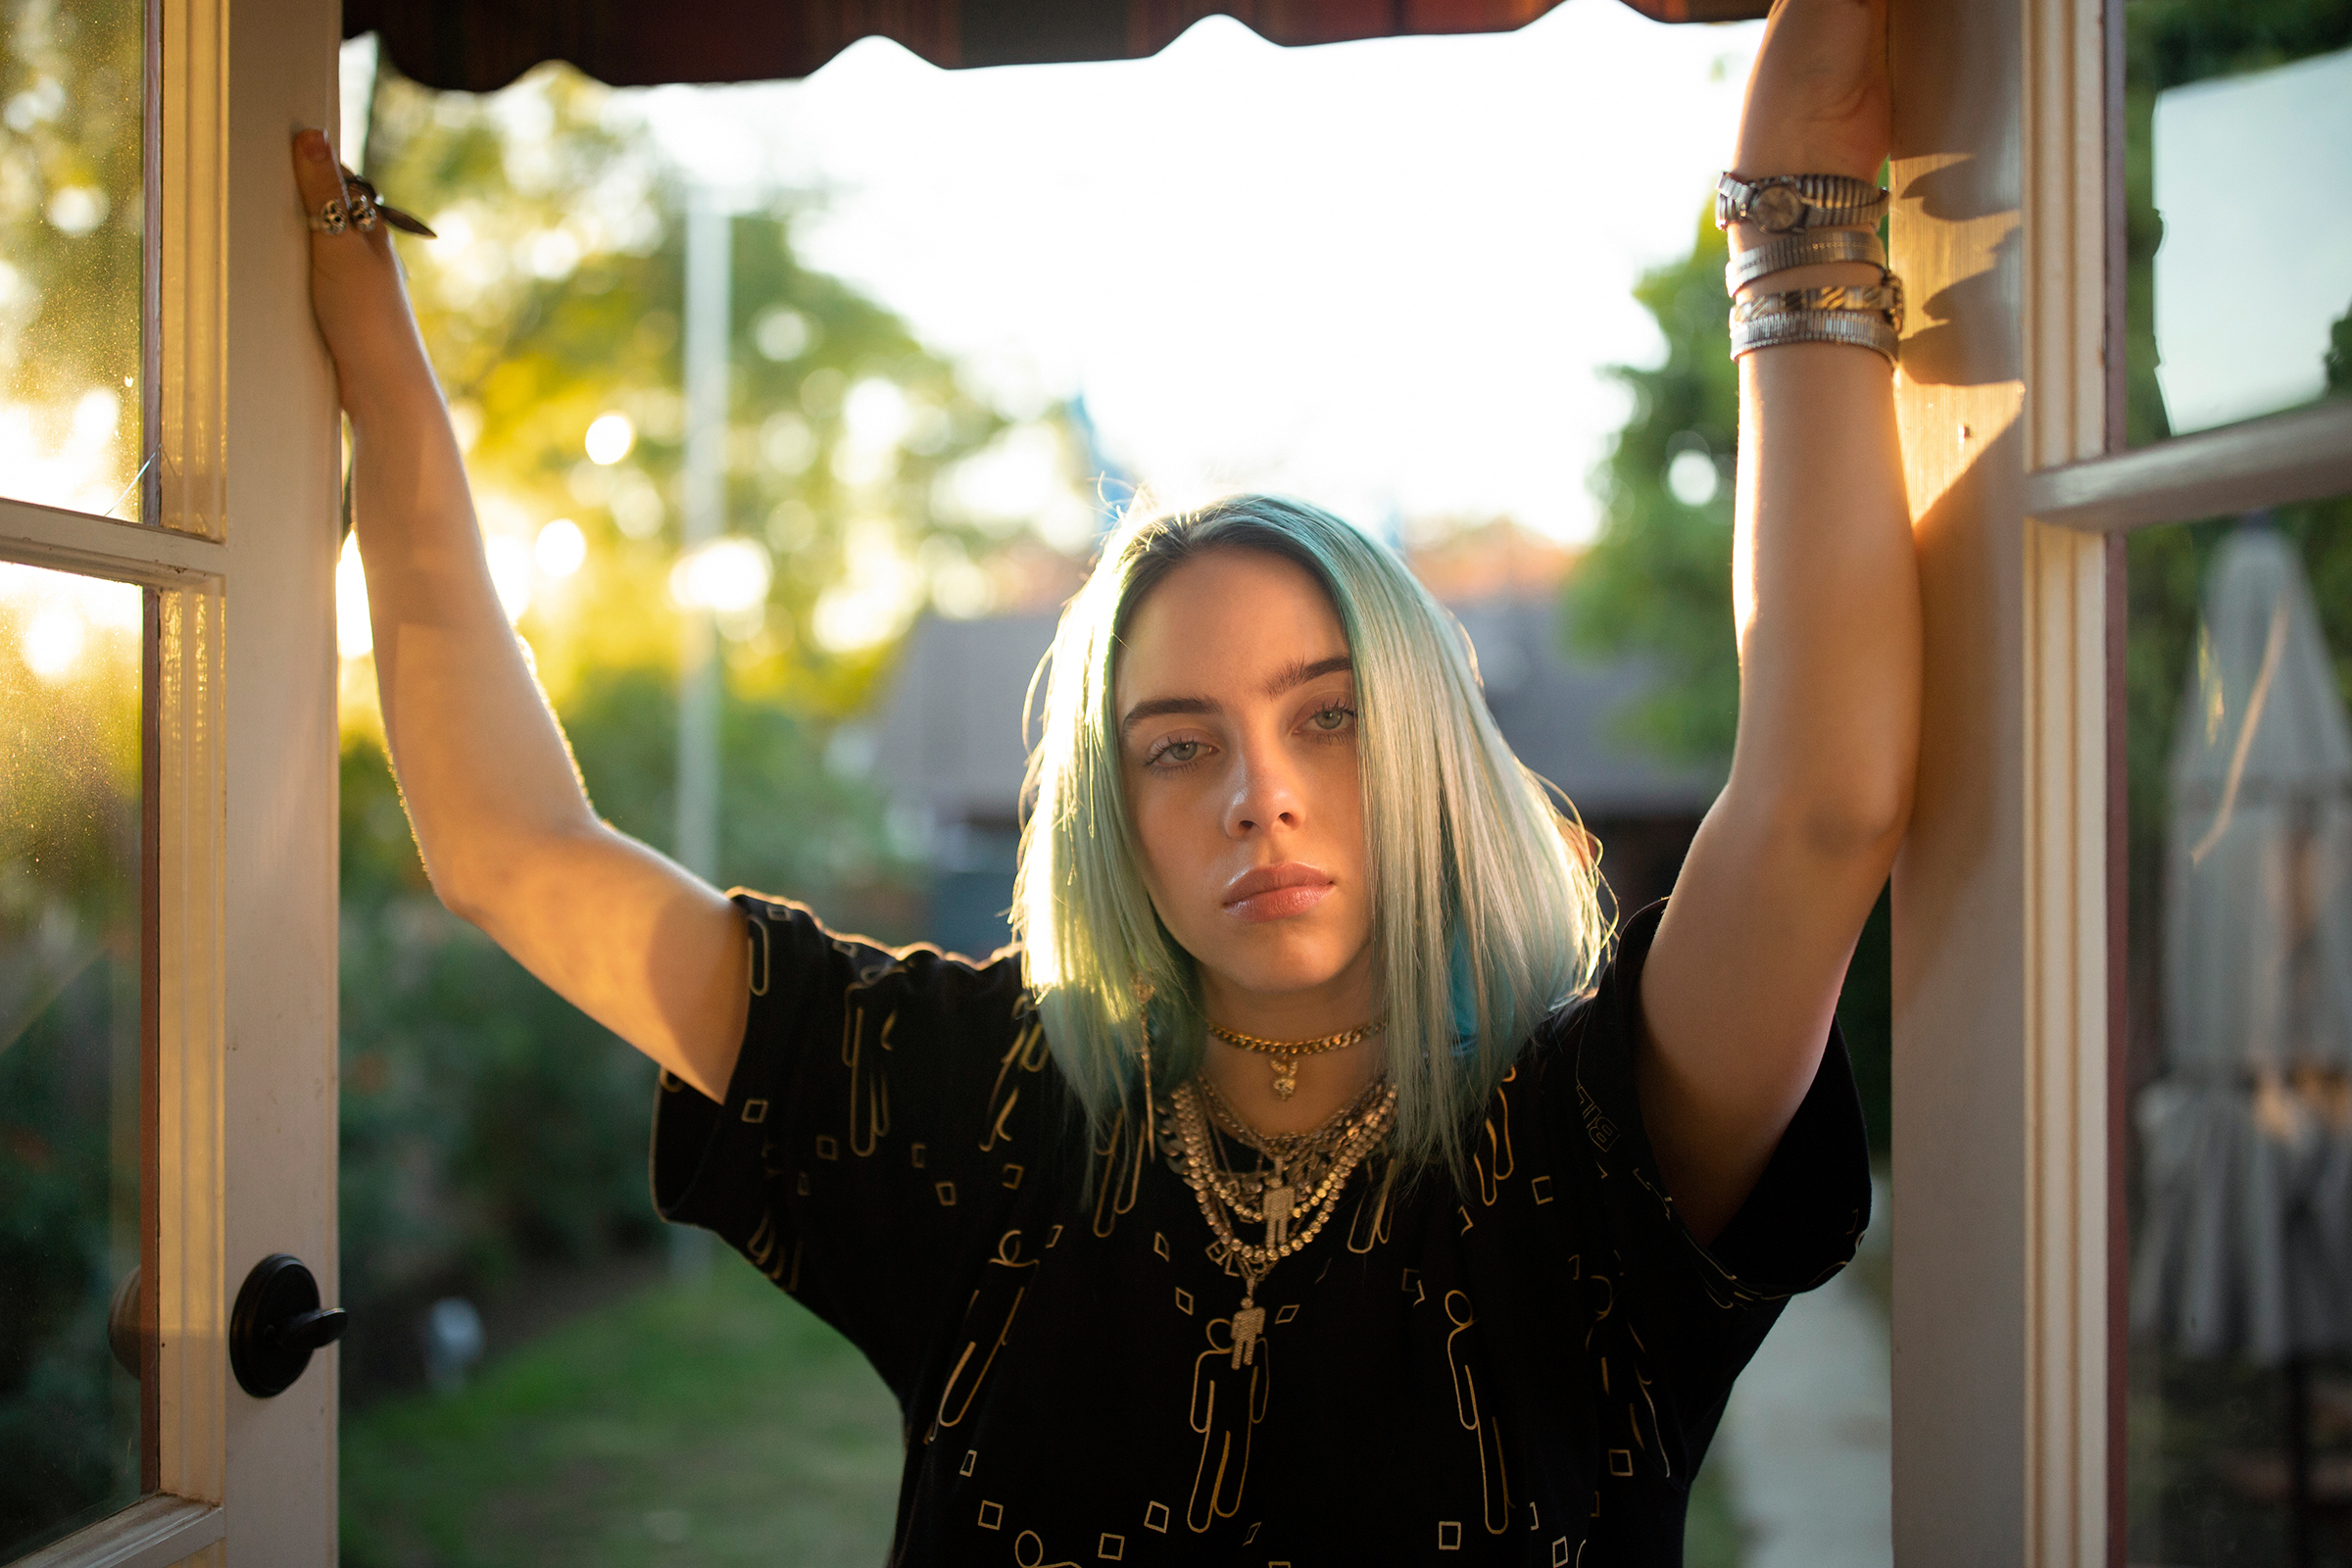 Billie Eilish Photoshoot Wallpaper, HD Music 4K Wallpapers, Images and ...